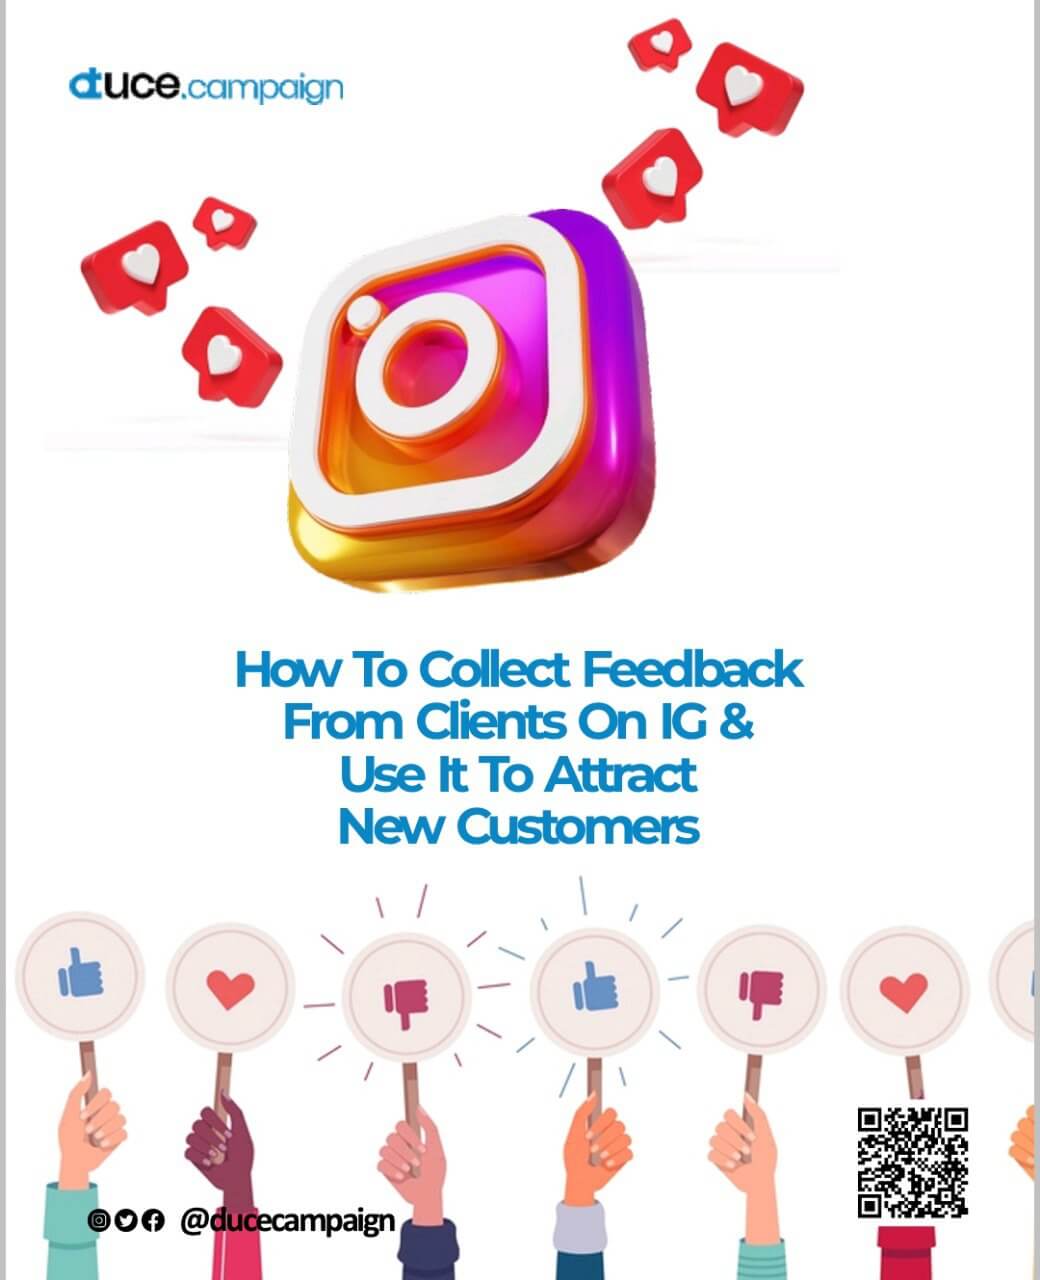 How To Collect Feedback From Clients On IG -- Use It To Attract New Customers